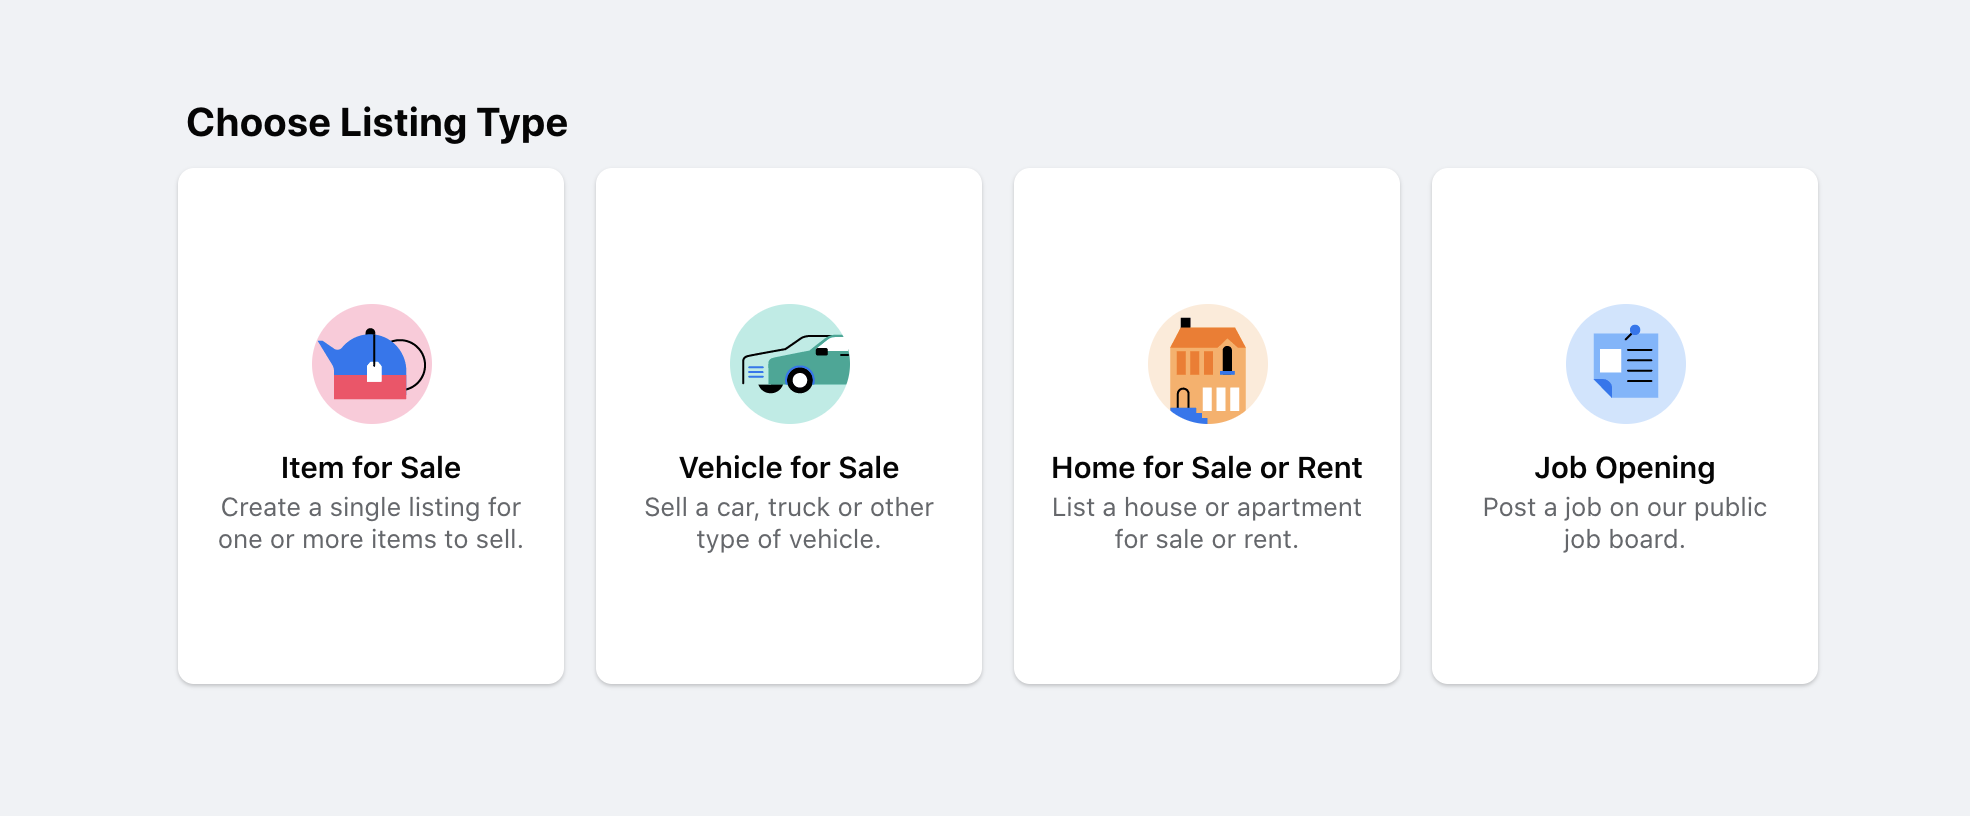 A Facebook marketplace auto listing software